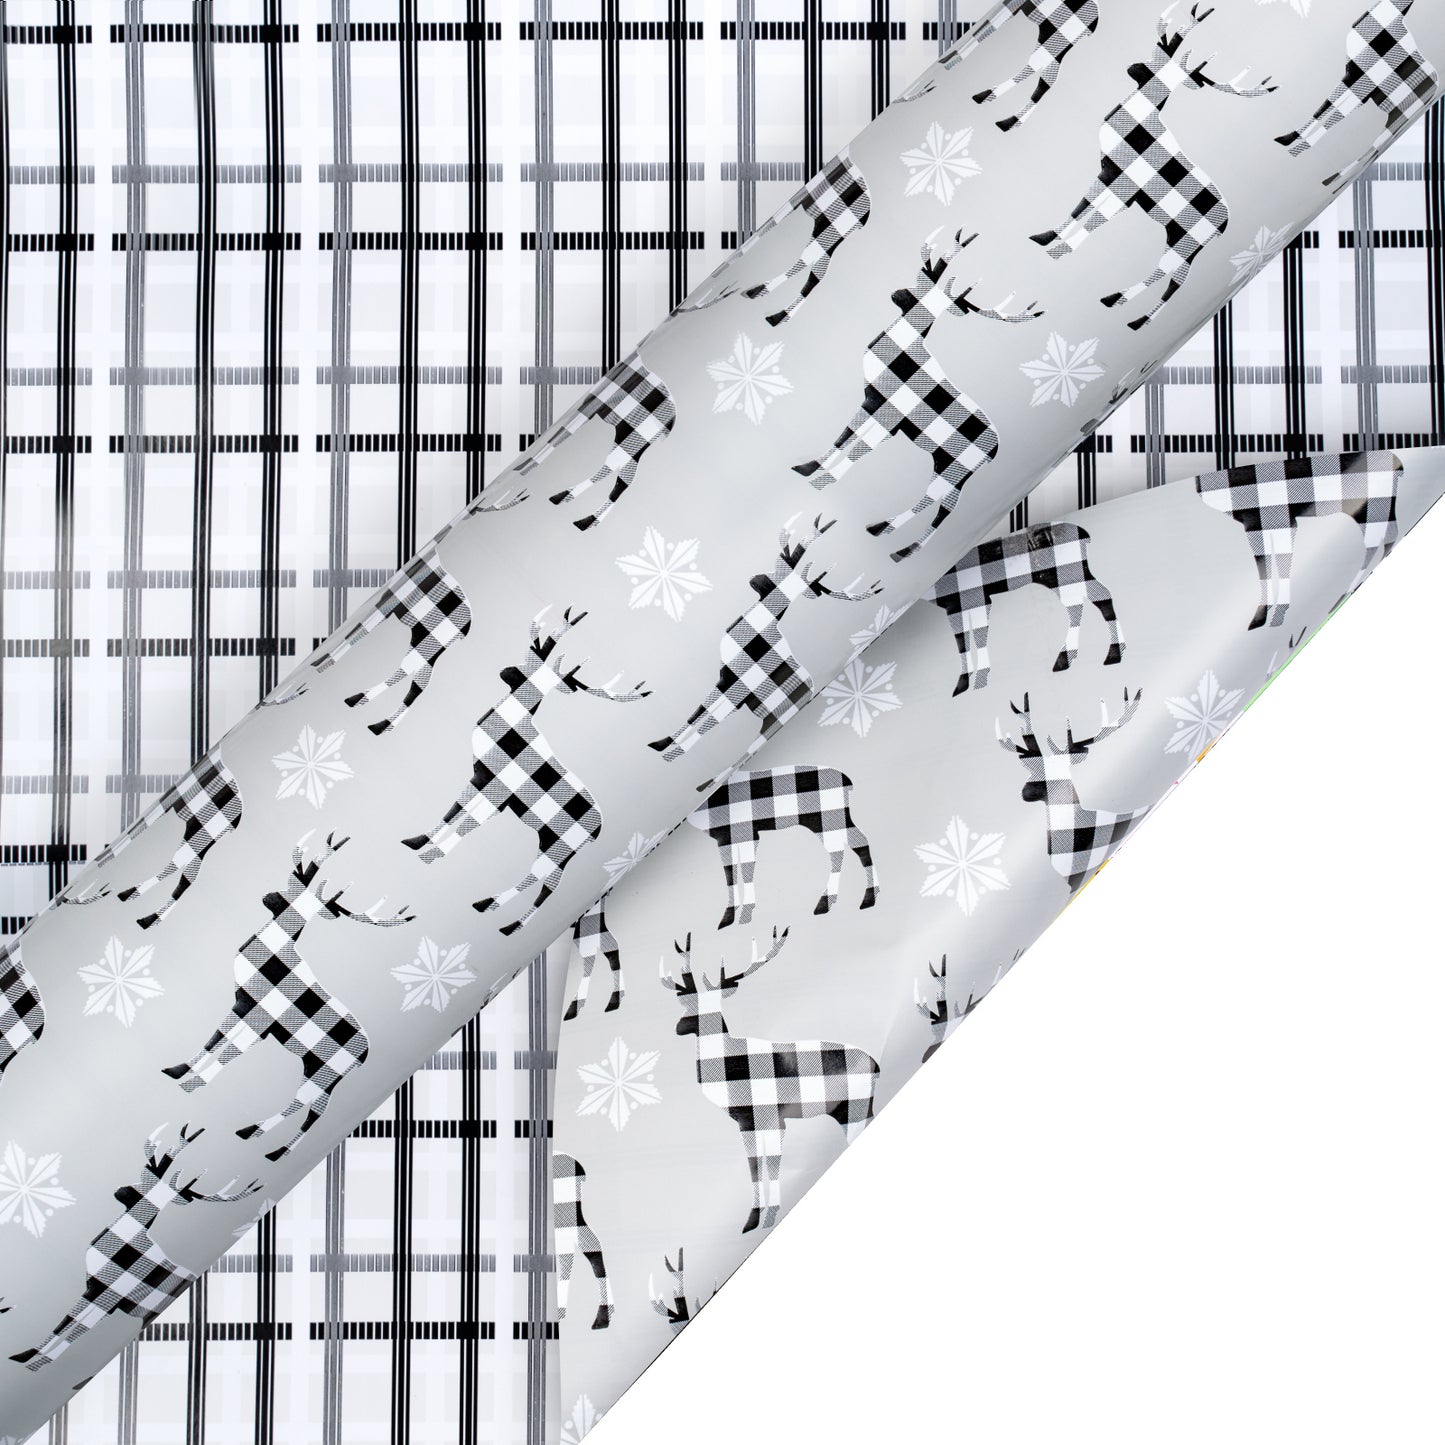 Buffalo Deer Wrapping Paper Roll with White and Black Buffalo Grid on Reverse Wholesale Wrapholic